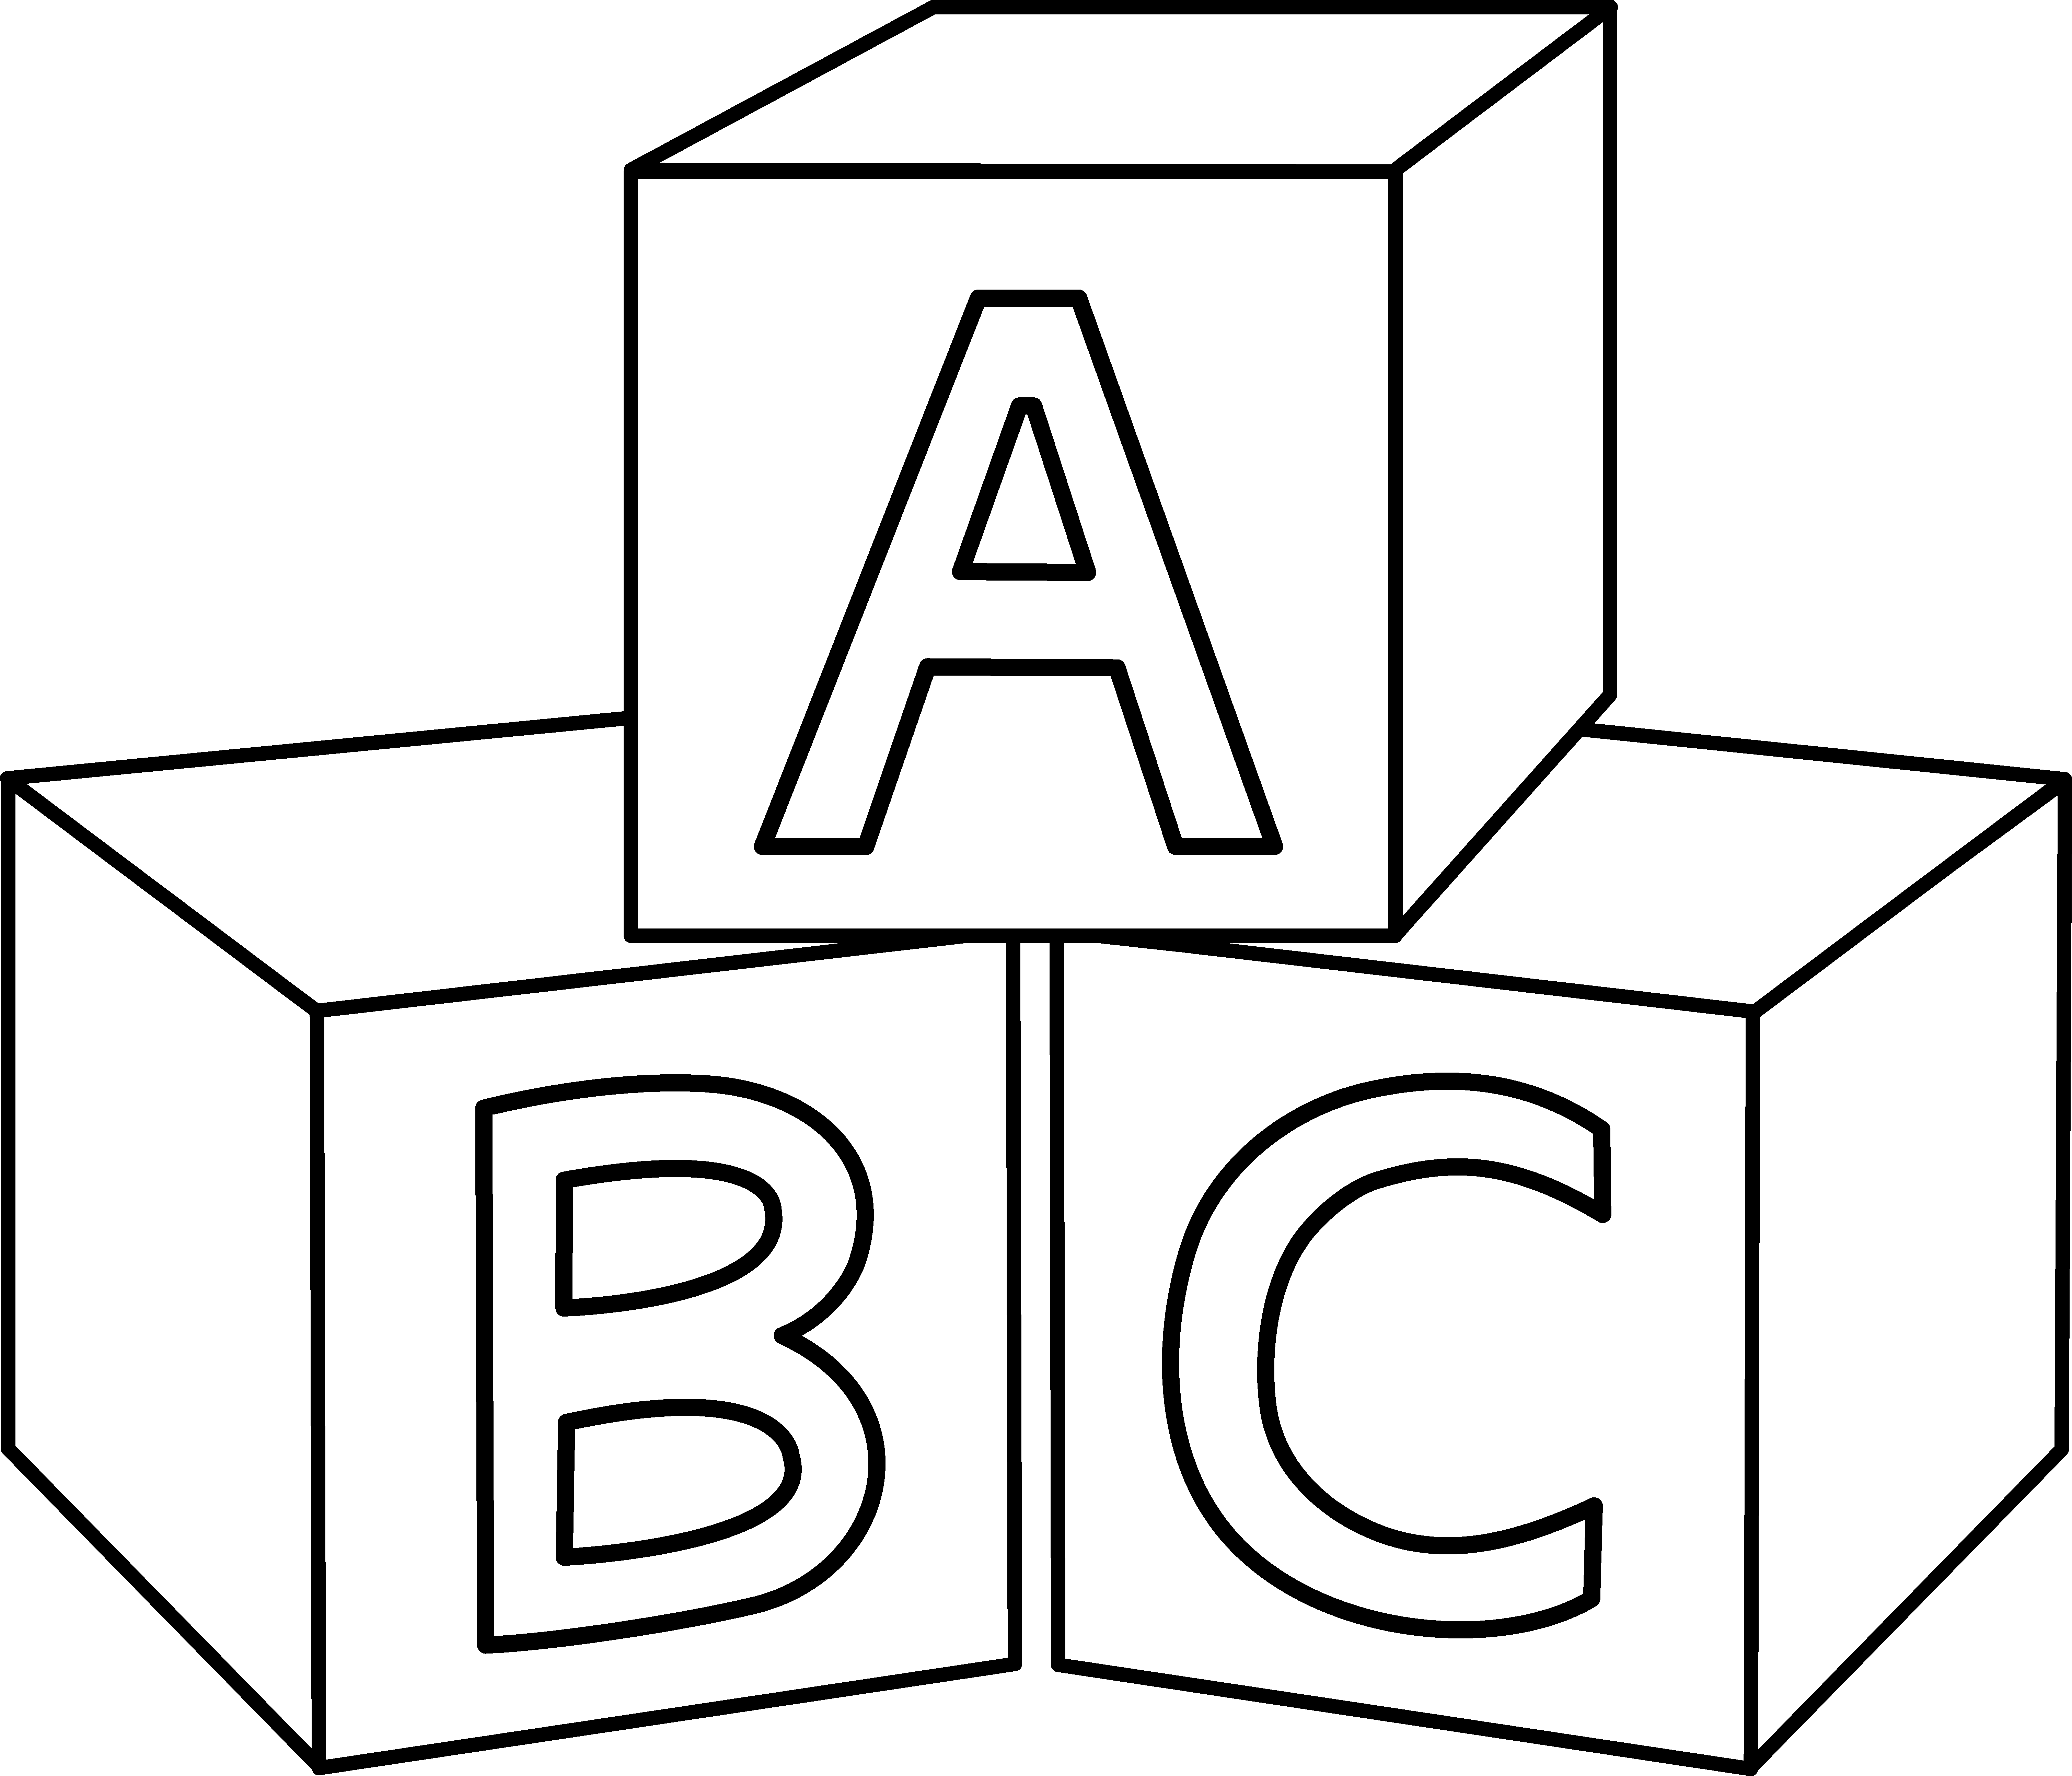 Download Abc Blocks Coloring Page Block Clipart Black And White Png Image With No Background